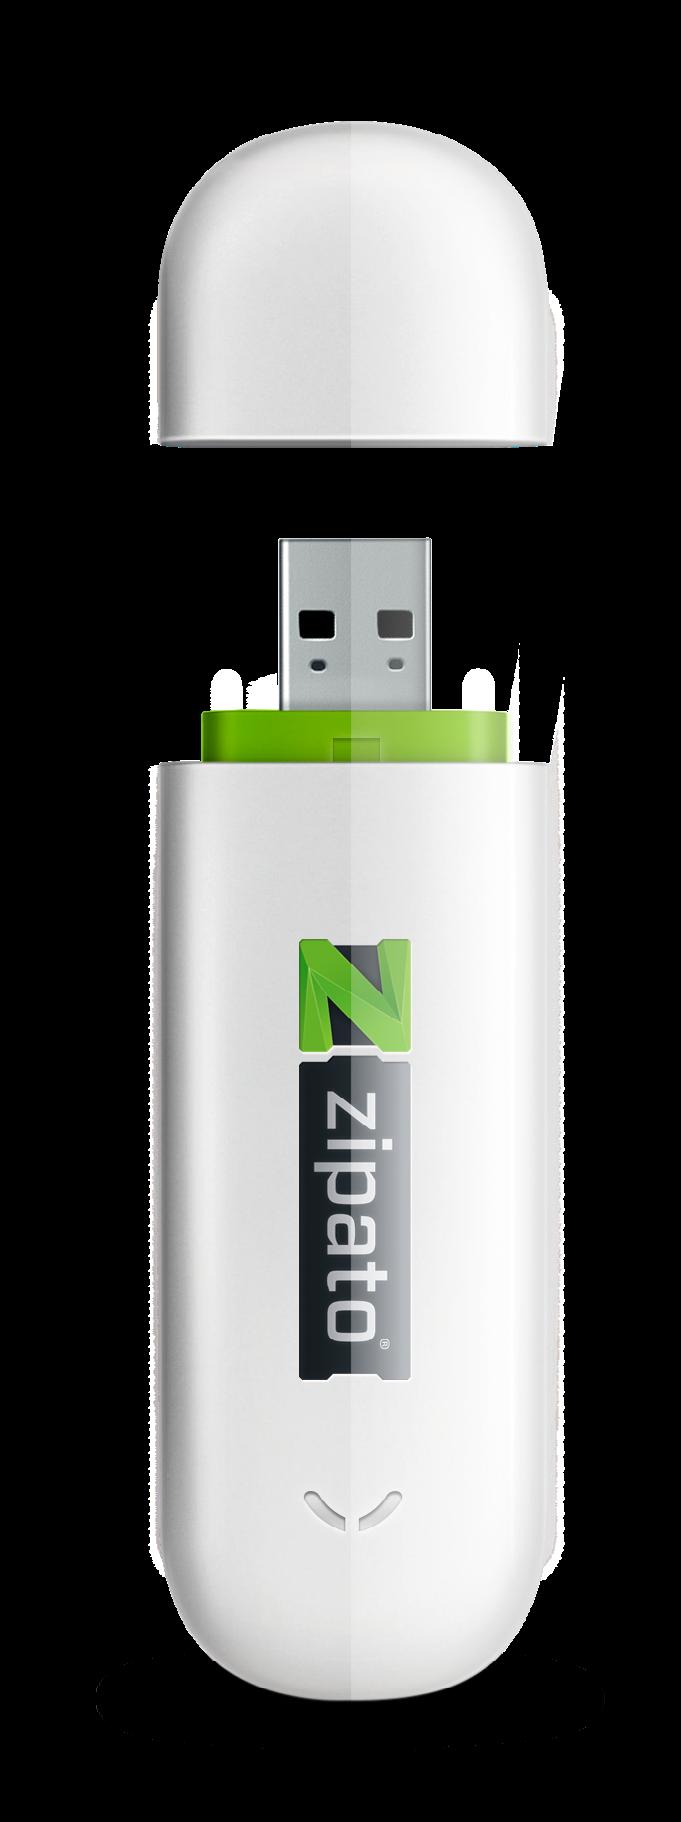 Zipato can be used with any 2G/ 3G SIM card, wherever Dual Band, Tri Band or Quad Band SIMs are supported.